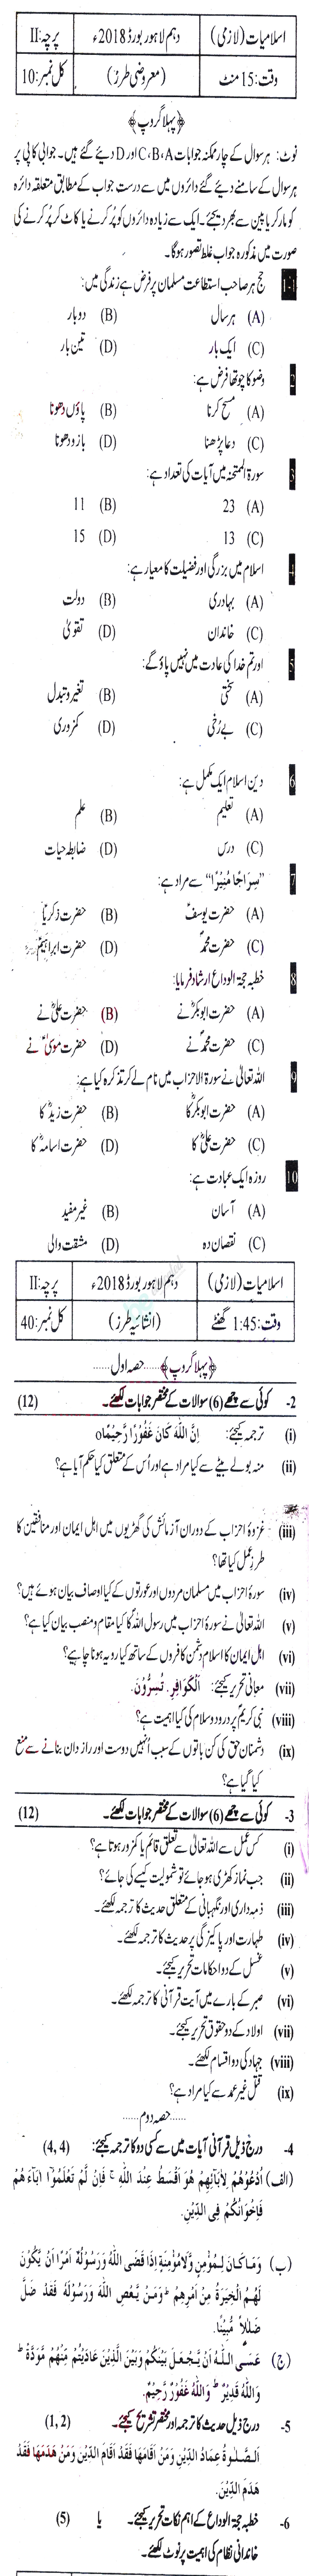 Islamiat (Compulsory) 10th class Past Paper Group 1 BISE Lahore 2018